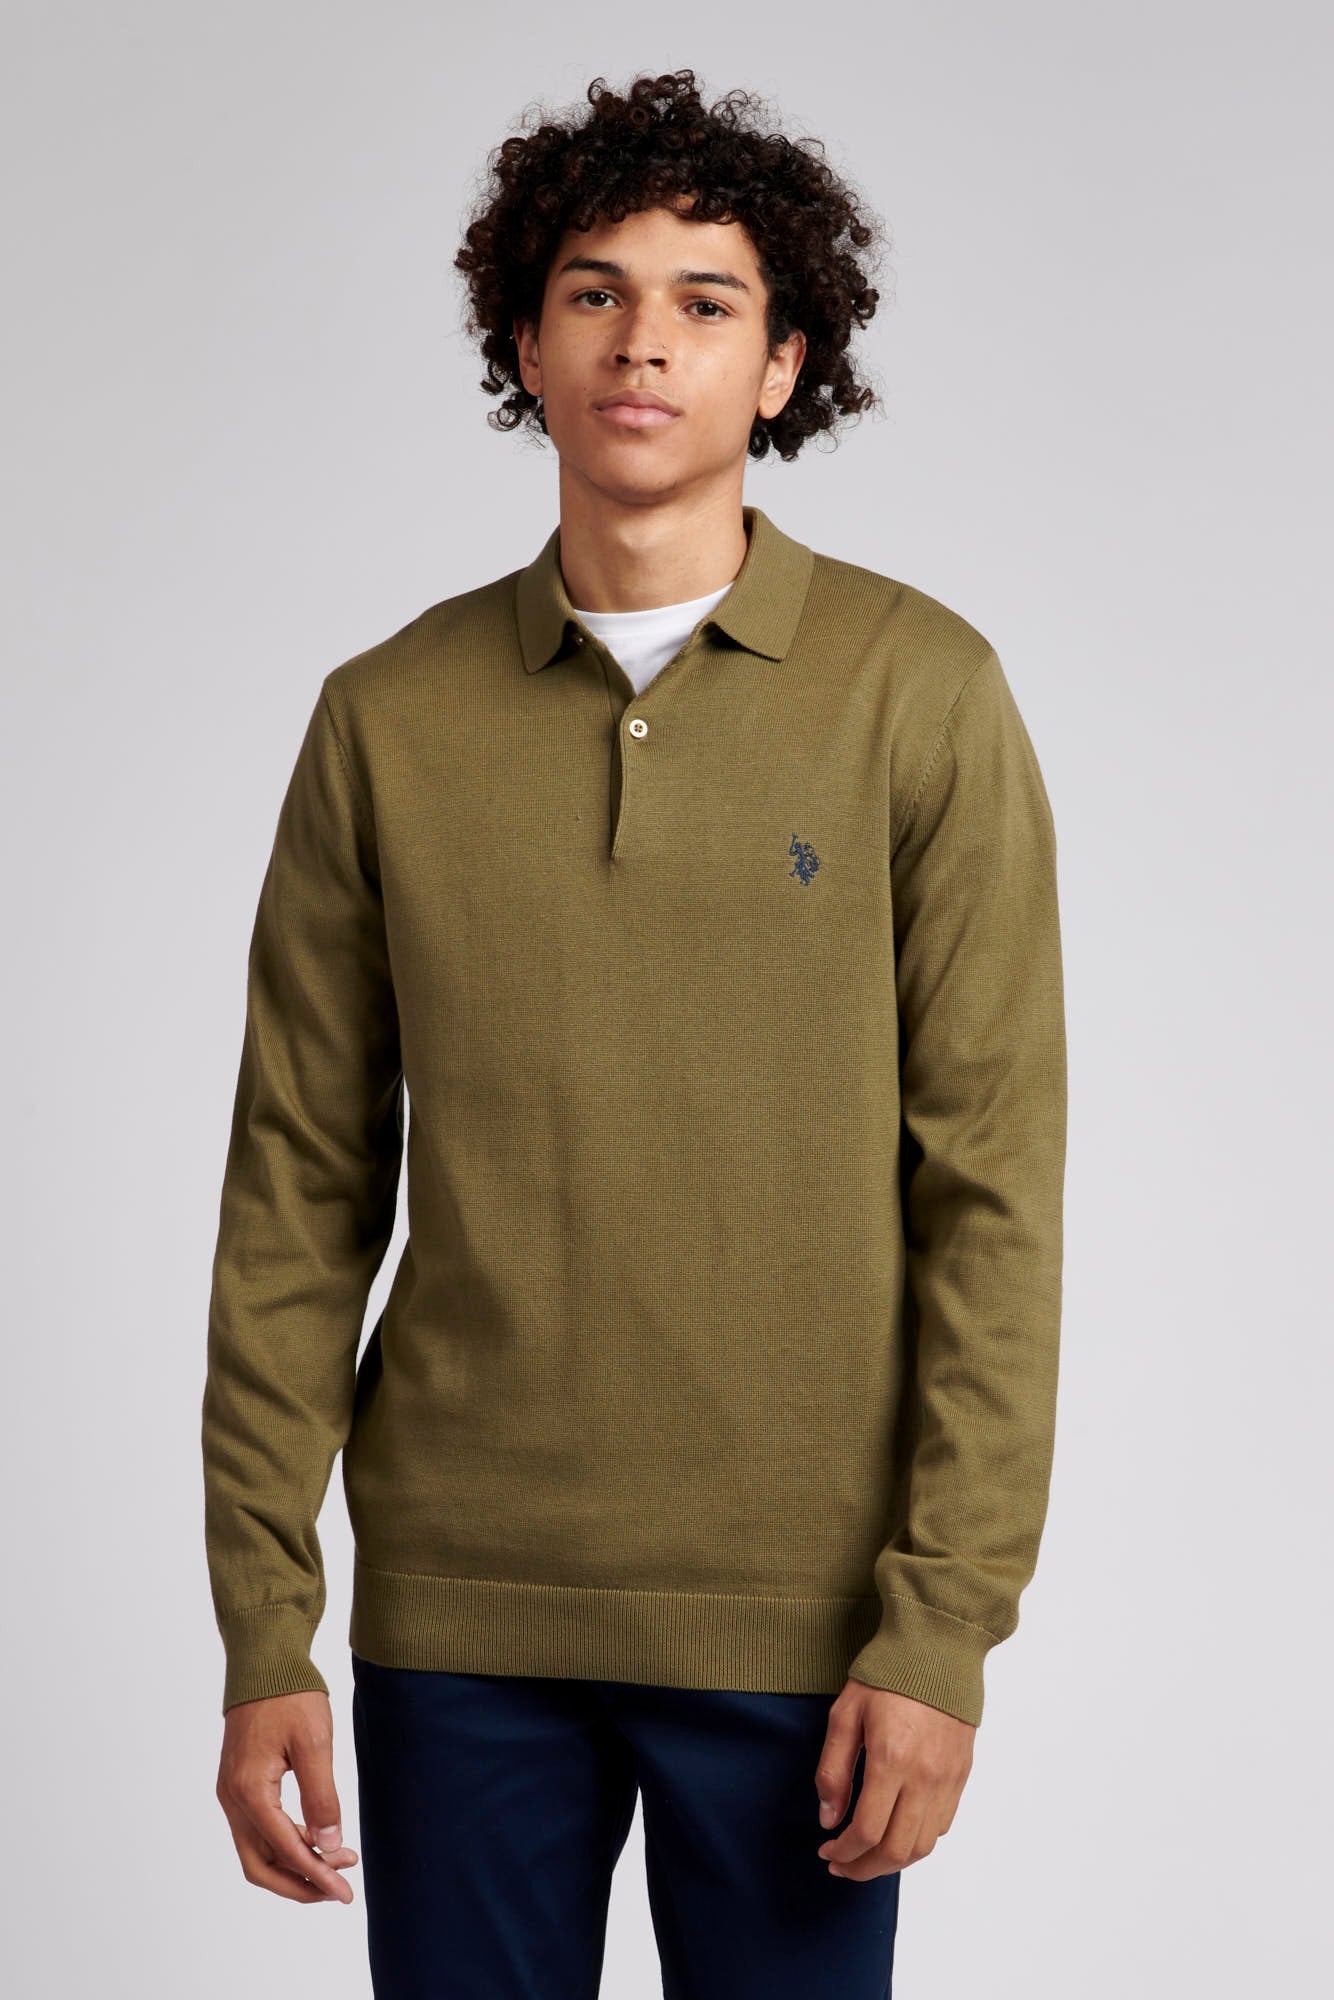 U.S. Polo Assn. Mens Long Sleeve Knitted Polo Shirt in Burnt Olive